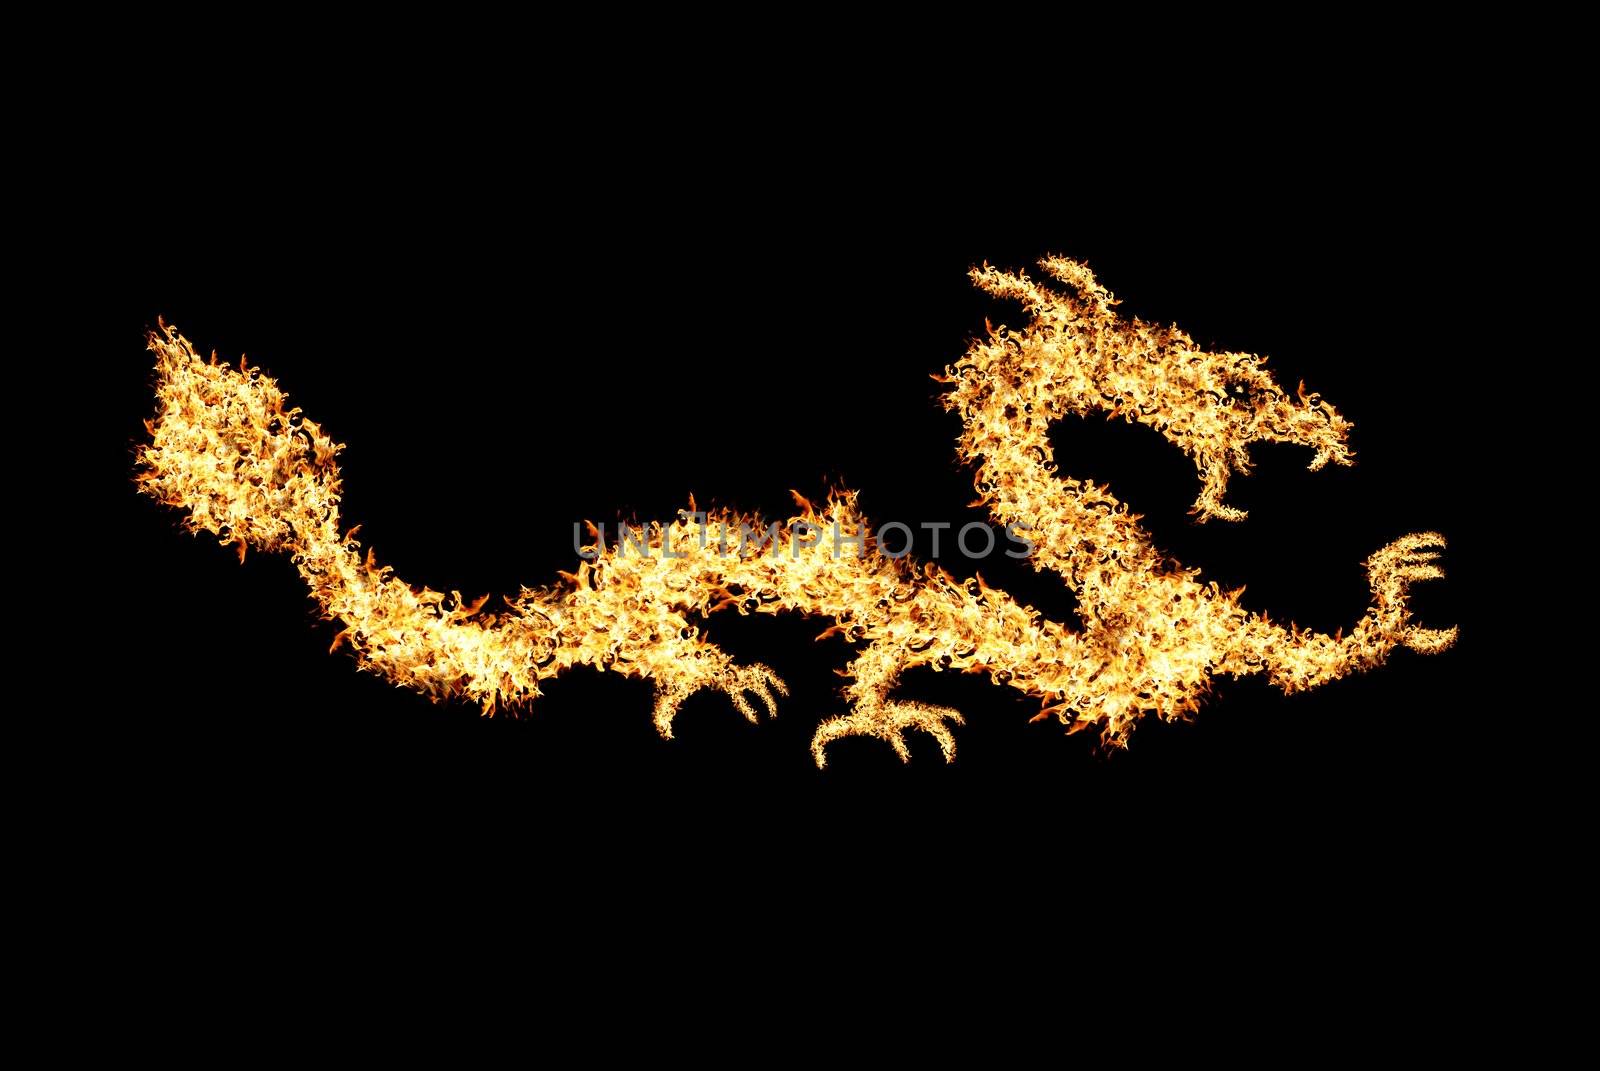 Abstract fiery dragon. Illustration number two on black background for design